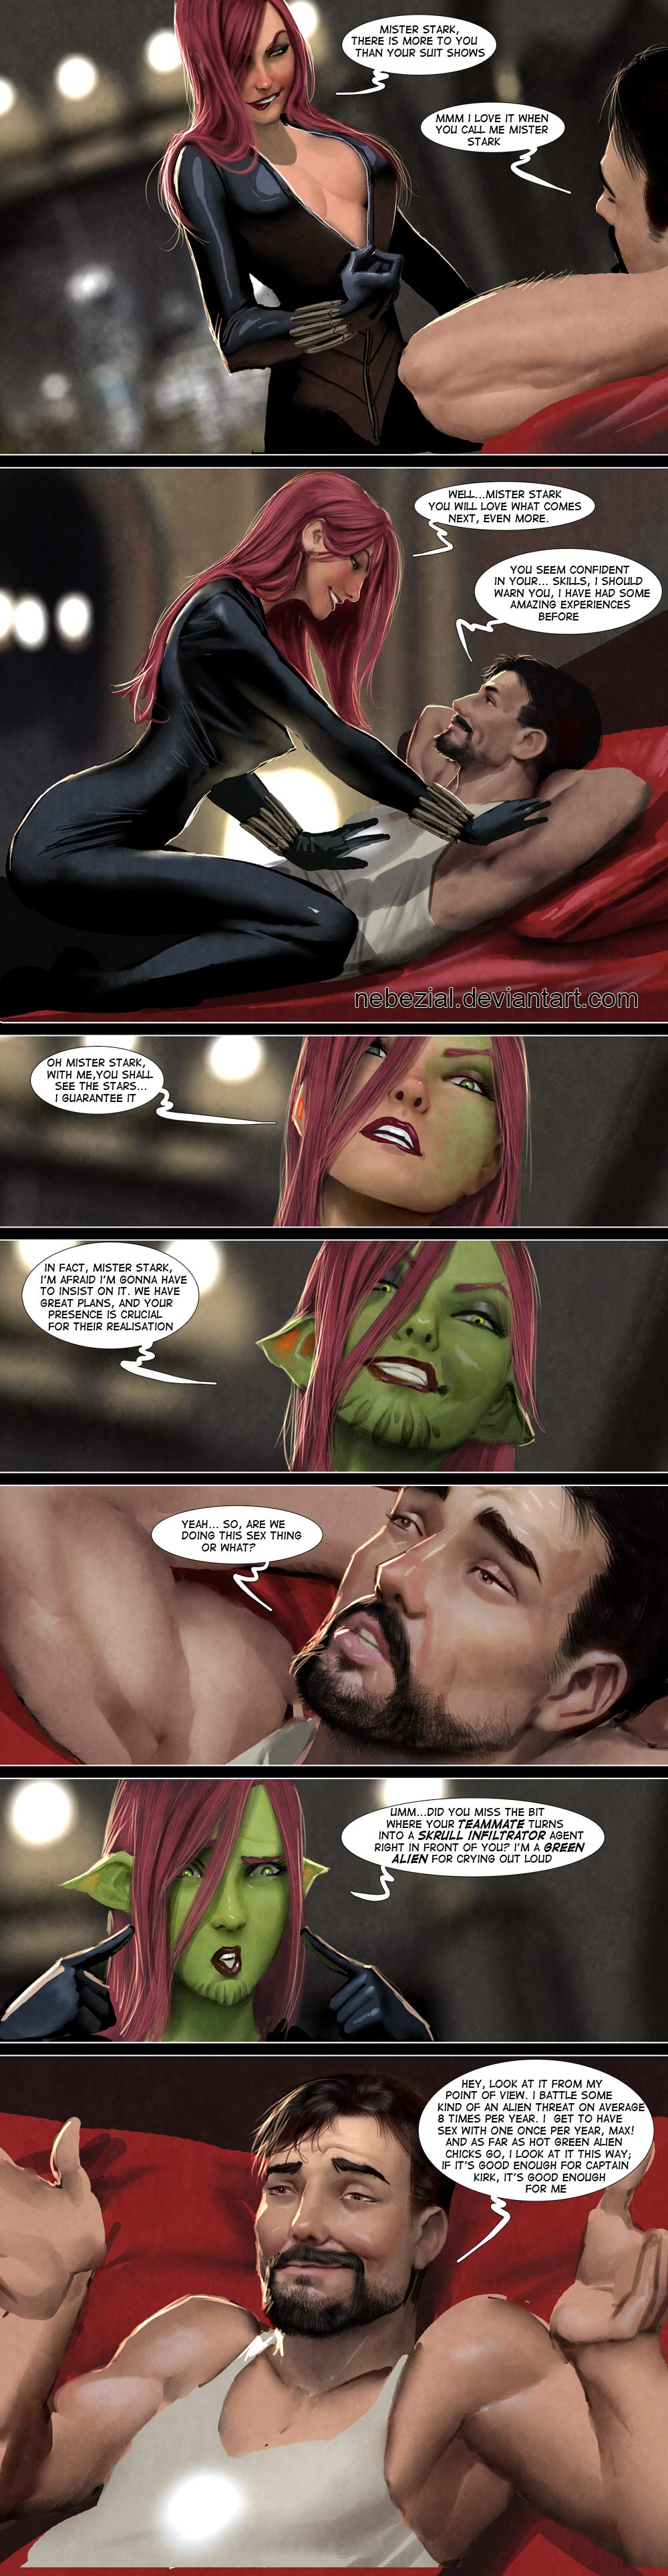 Tony-Stark-Tricked-By-A-Black-Widow-Imposter-InComic,Tony Stark Tricked By A Black Widow Imposter InComic,Tony Stark Tricked By A Black Widow,Tony Stark ,Tricked By A Black Widow,Tony Stark Comic,Tony Stark Meme,Black Widow Meme,Black Widow Comic,Funny,avengers,avengers comic,avengers meme,